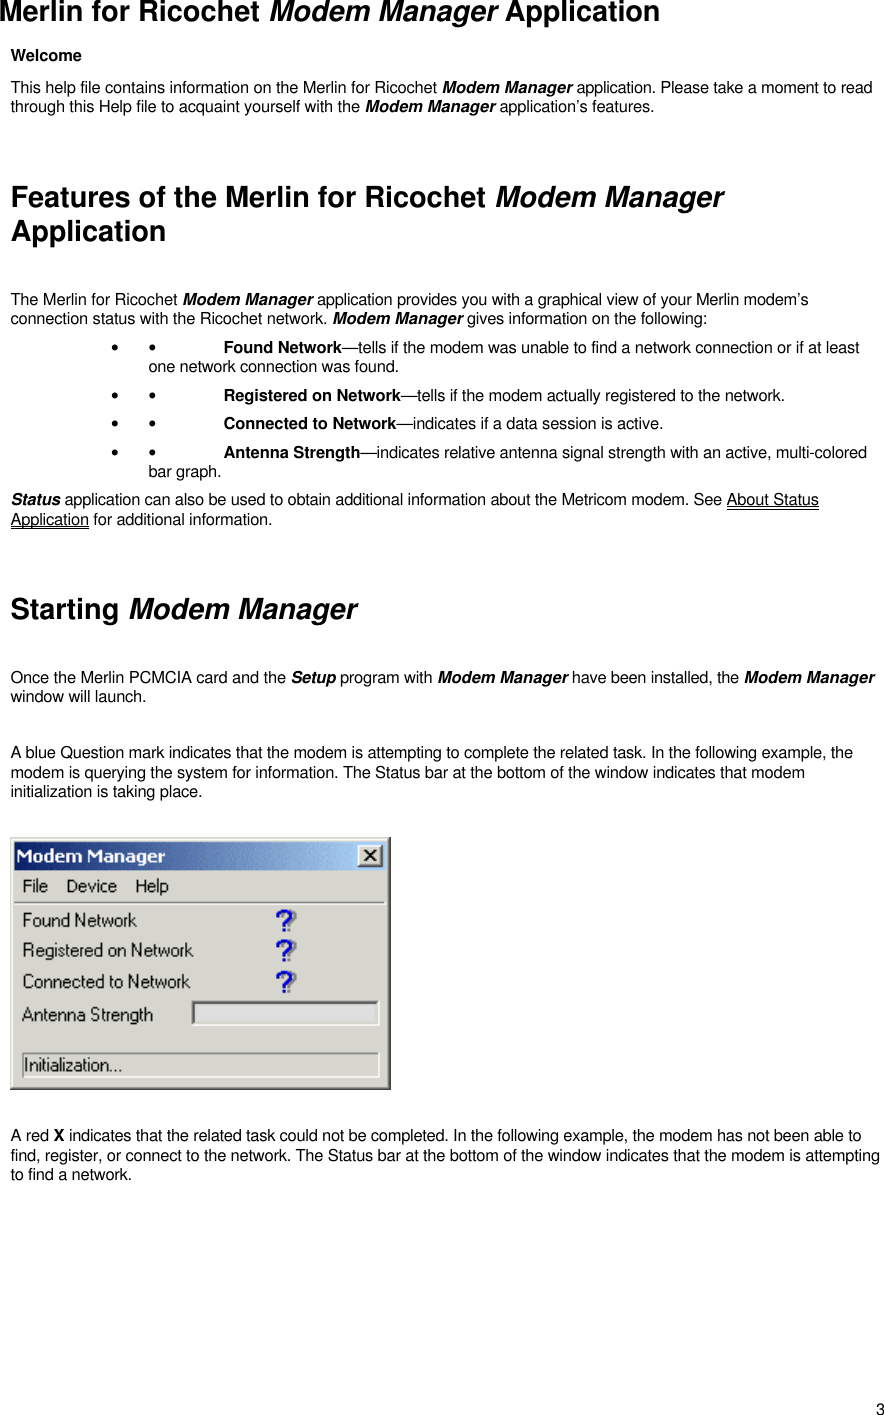 3Merlin for Ricochet Modem Manager ApplicationWelcomeThis help file contains information on the Merlin for Ricochet Modem Manager application. Please take a moment to readthrough this Help file to acquaint yourself with the Modem Manager application’s features.Features of the Merlin for Ricochet Modem ManagerApplicationThe Merlin for Ricochet Modem Manager application provides you with a graphical view of your Merlin modem’sconnection status with the Ricochet network. Modem Manager gives information on the following:• •Found Network—tells if the modem was unable to find a network connection or if at leastone network connection was found.• •Registered on Network—tells if the modem actually registered to the network.• •Connected to Network—indicates if a data session is active.• •Antenna Strength—indicates relative antenna signal strength with an active, multi-coloredbar graph.Status application can also be used to obtain additional information about the Metricom modem. See About StatusApplication for additional information.Starting Modem ManagerOnce the Merlin PCMCIA card and the Setup program with Modem Manager have been installed, the Modem Managerwindow will launch.A blue Question mark indicates that the modem is attempting to complete the related task. In the following example, themodem is querying the system for information. The Status bar at the bottom of the window indicates that modeminitialization is taking place.A red X indicates that the related task could not be completed. In the following example, the modem has not been able tofind, register, or connect to the network. The Status bar at the bottom of the window indicates that the modem is attemptingto find a network.